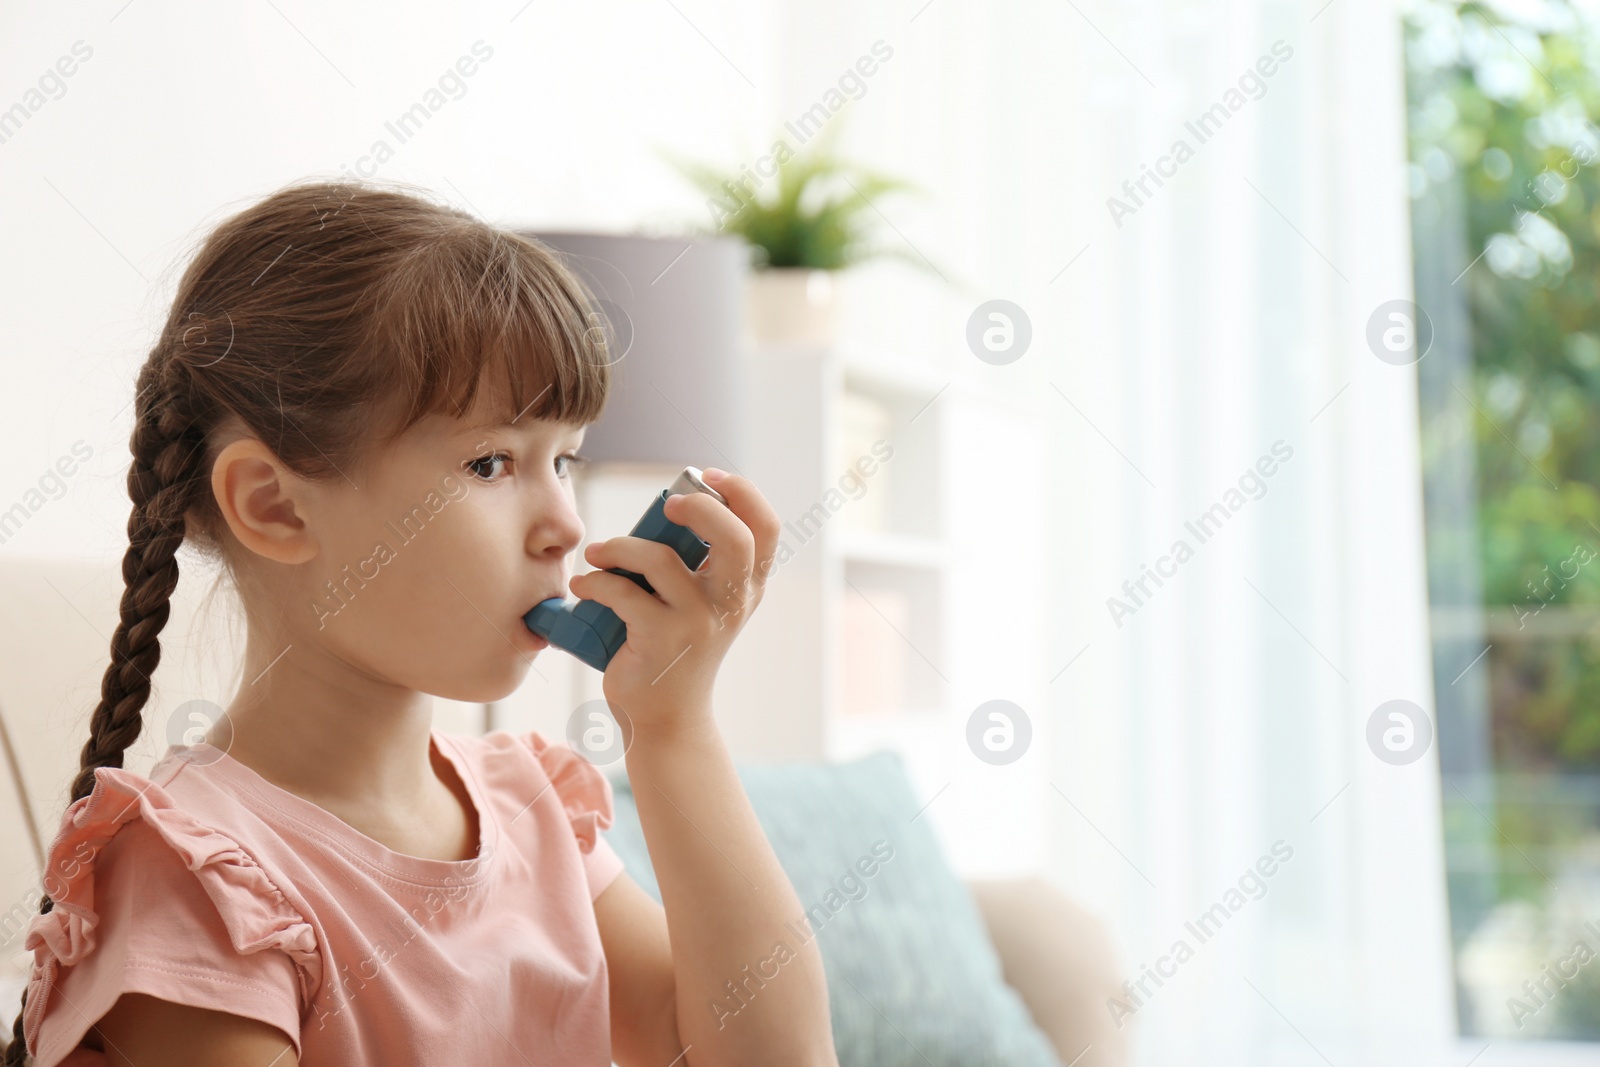 Photo of Little girl using asthma inhaler on blurred background